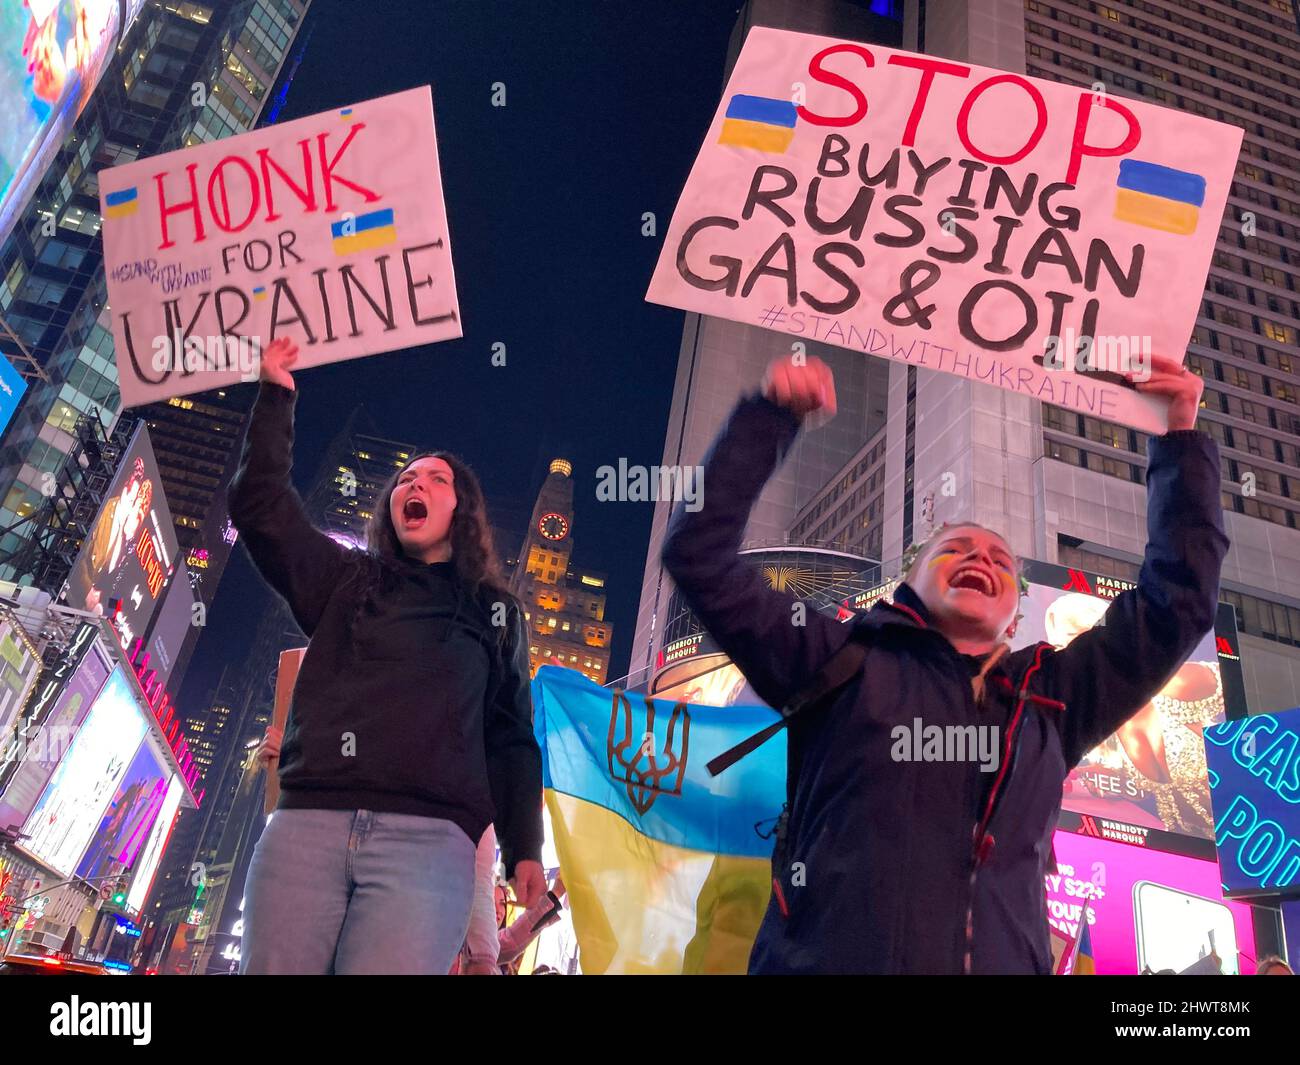 Ukrainian-Americans and their supporters protest the Russian invasion and show support for the citizens of the Ukraine, in Times Square in New York on Wednesday, March 2, 2022. (© Frances M. Roberts) Stock Photo